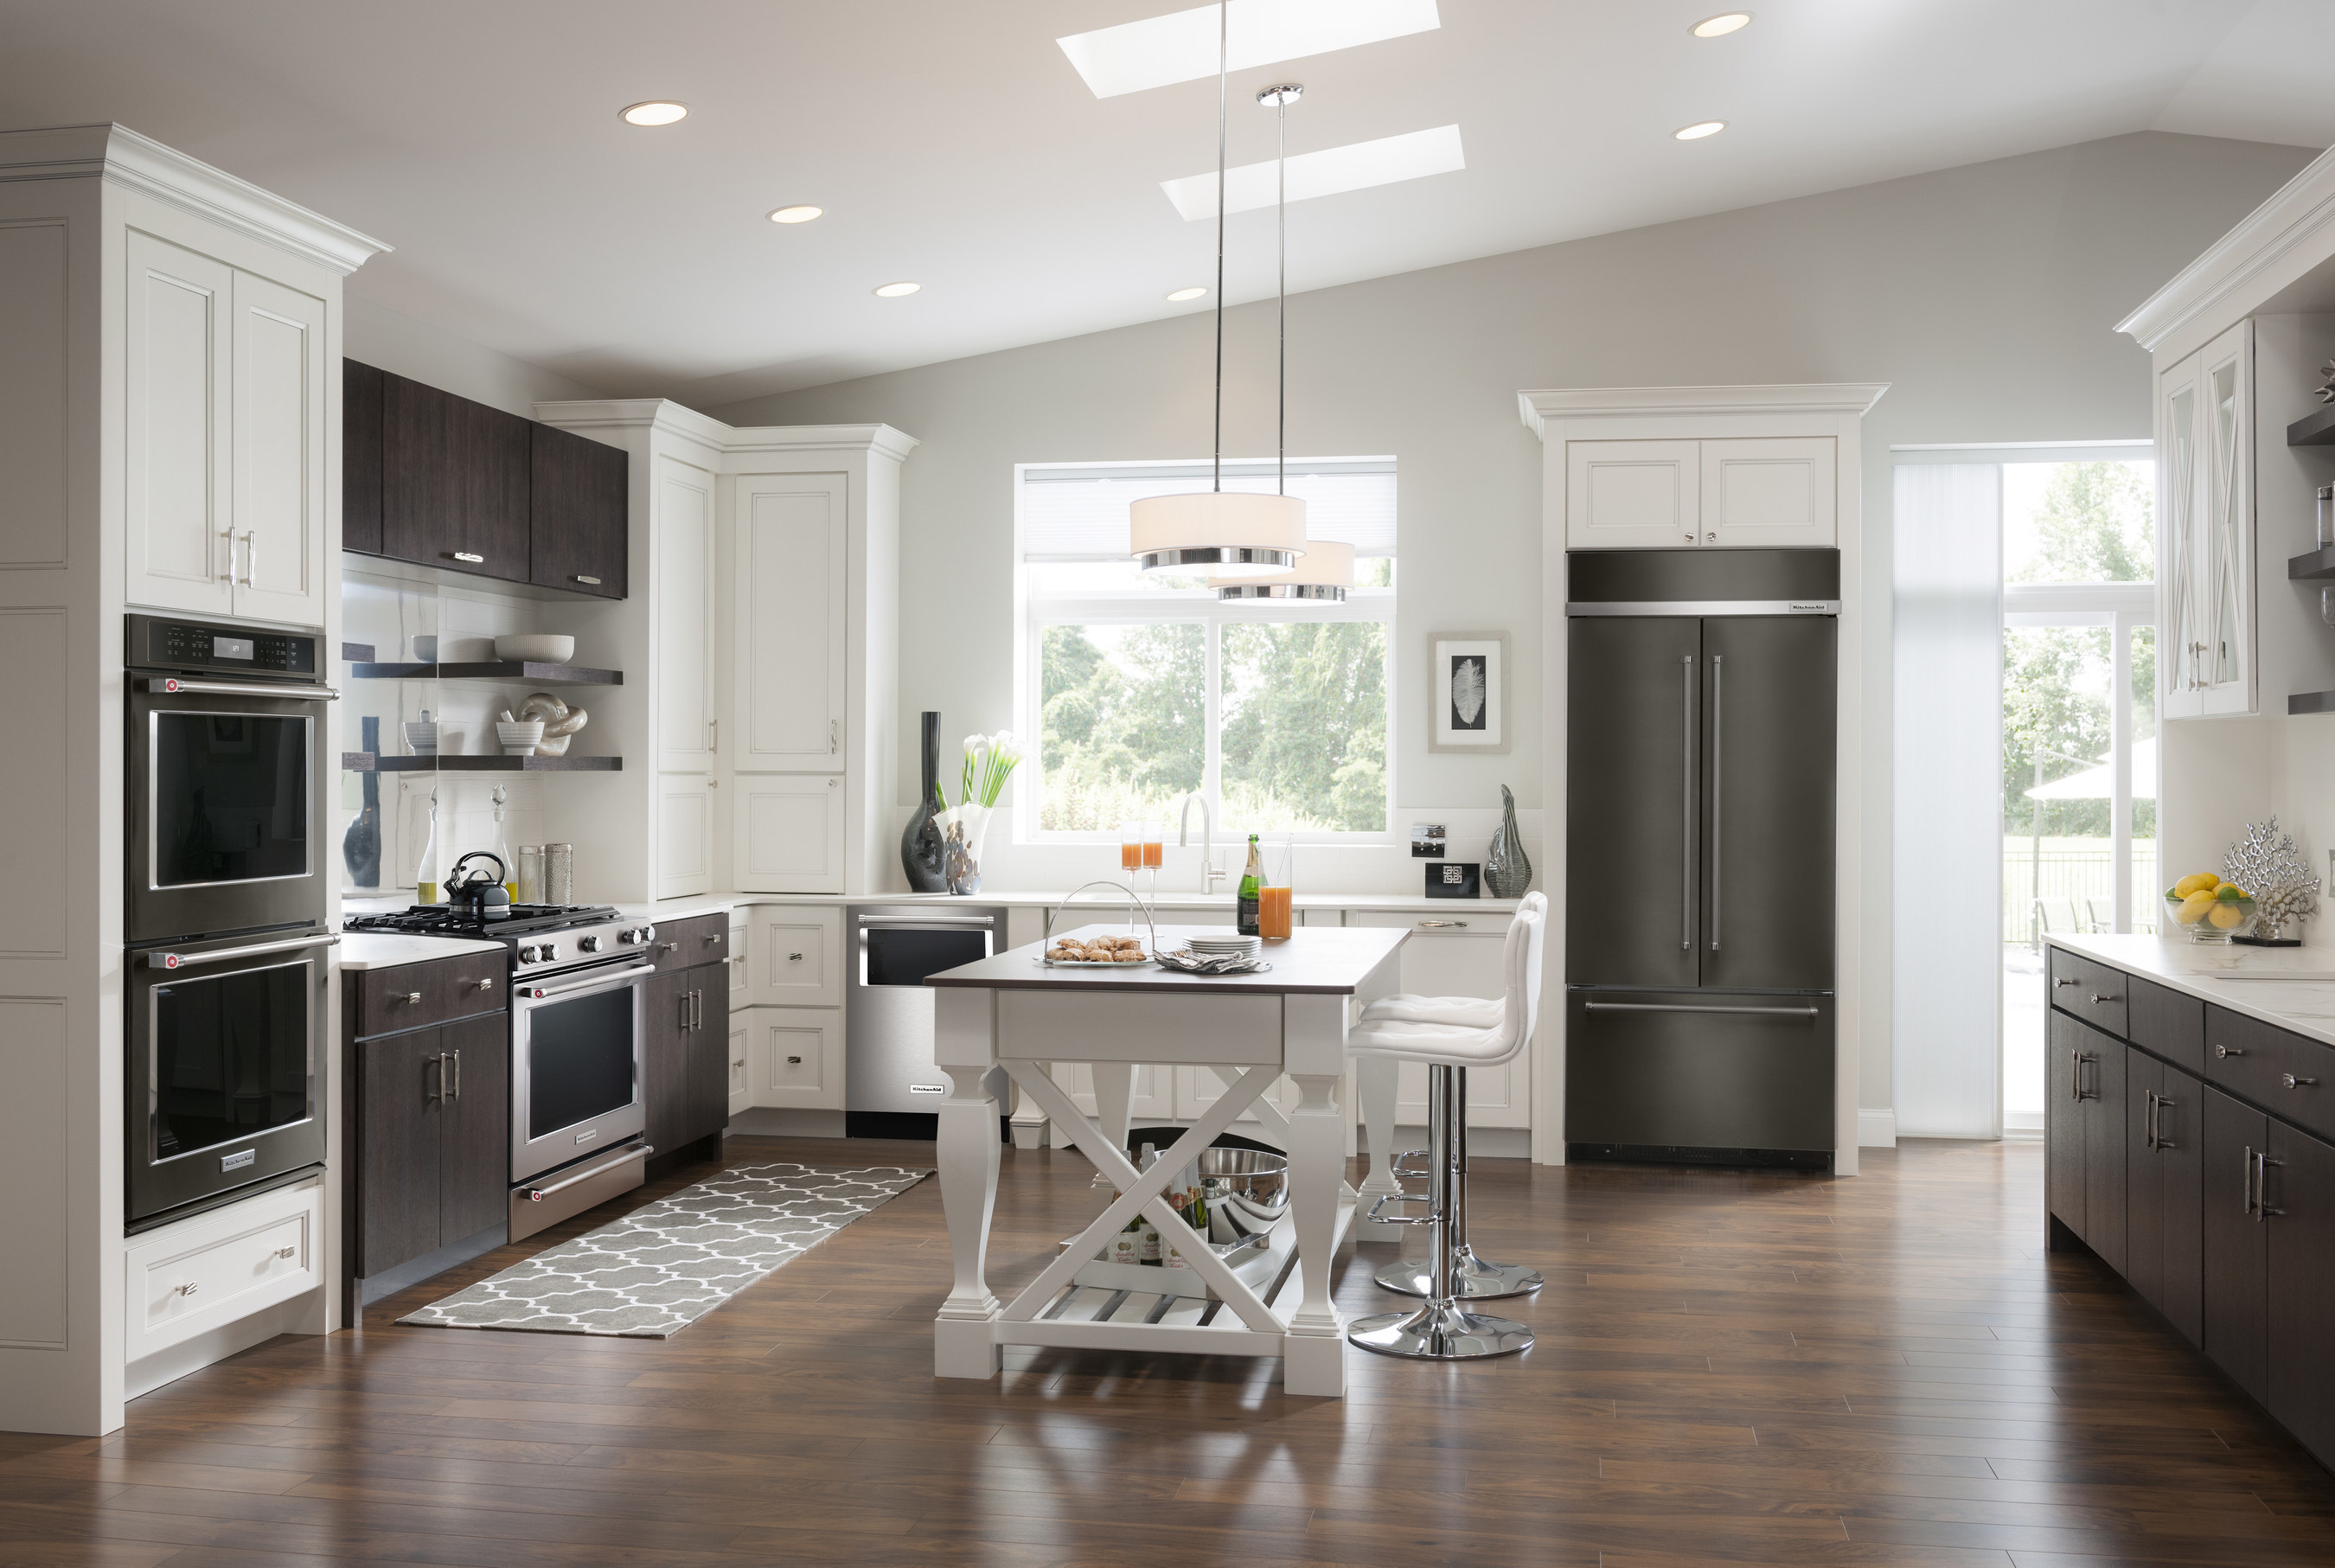 Ready For A Kitchen Revamp? New Black Stainless Steel And ...